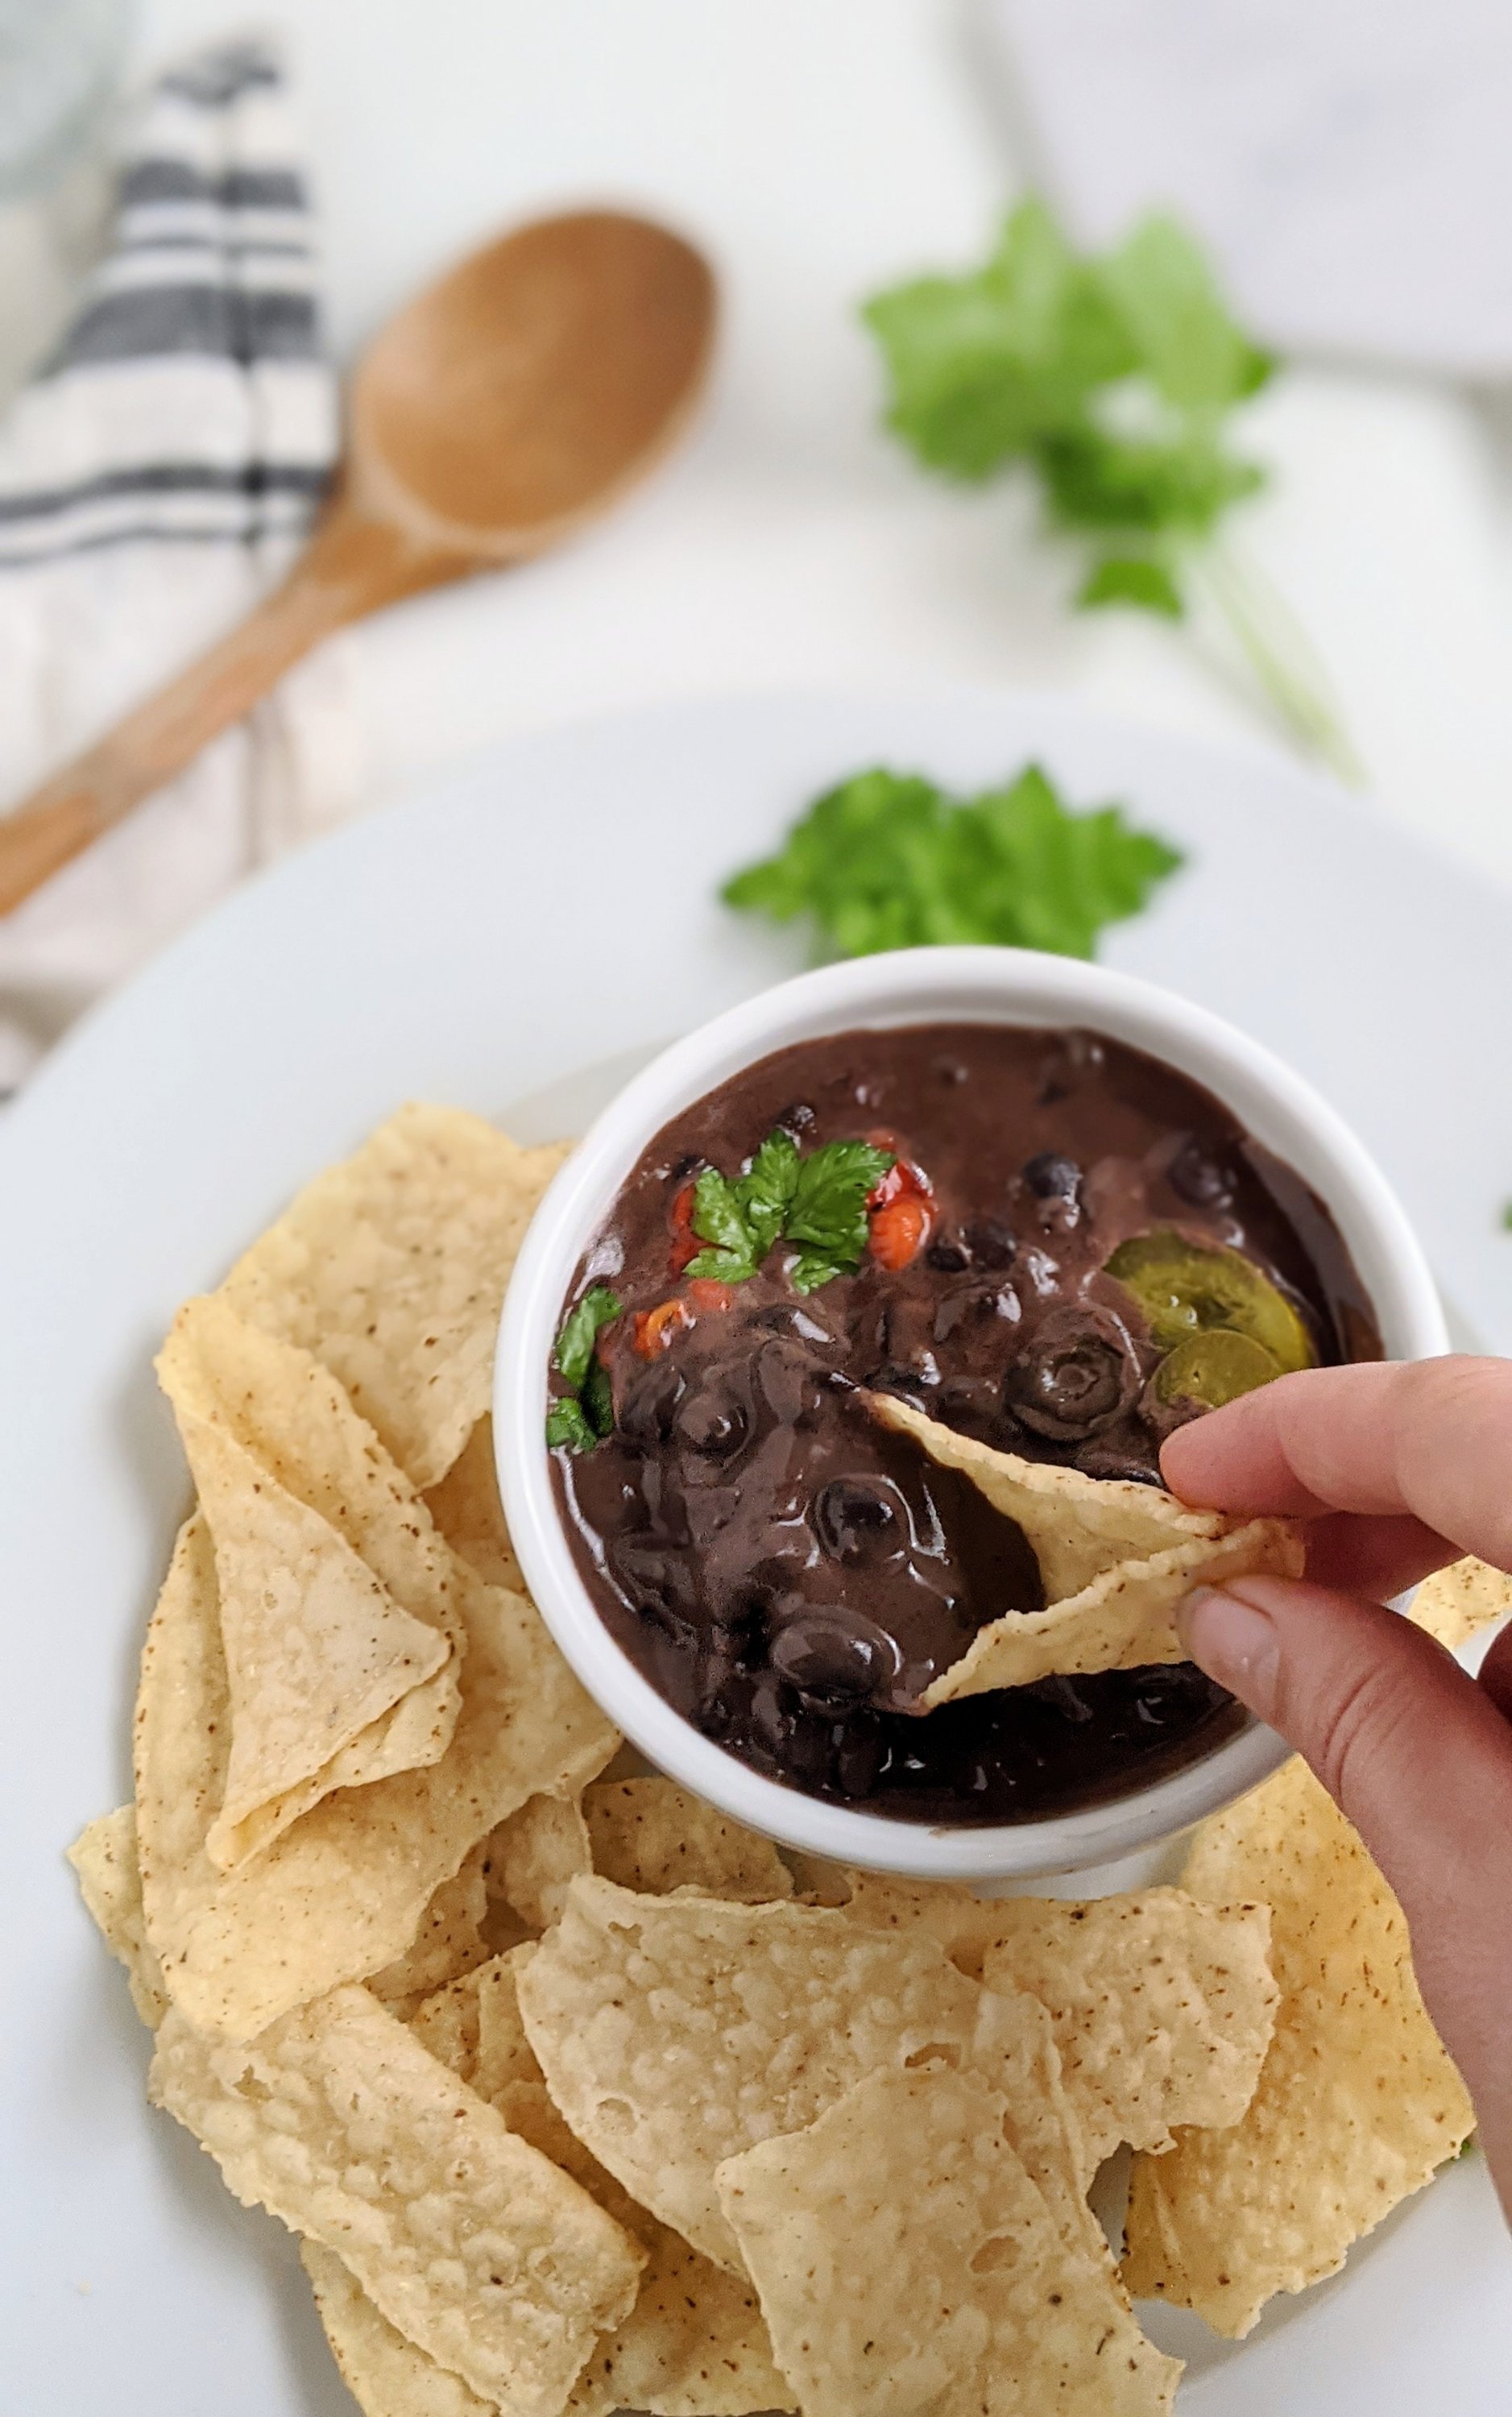 vegetarian super bowl recipes queso dip gluten free plant based protein black beans healthy high protein recipes for super bowl no meat meatless appetizers everyone will love